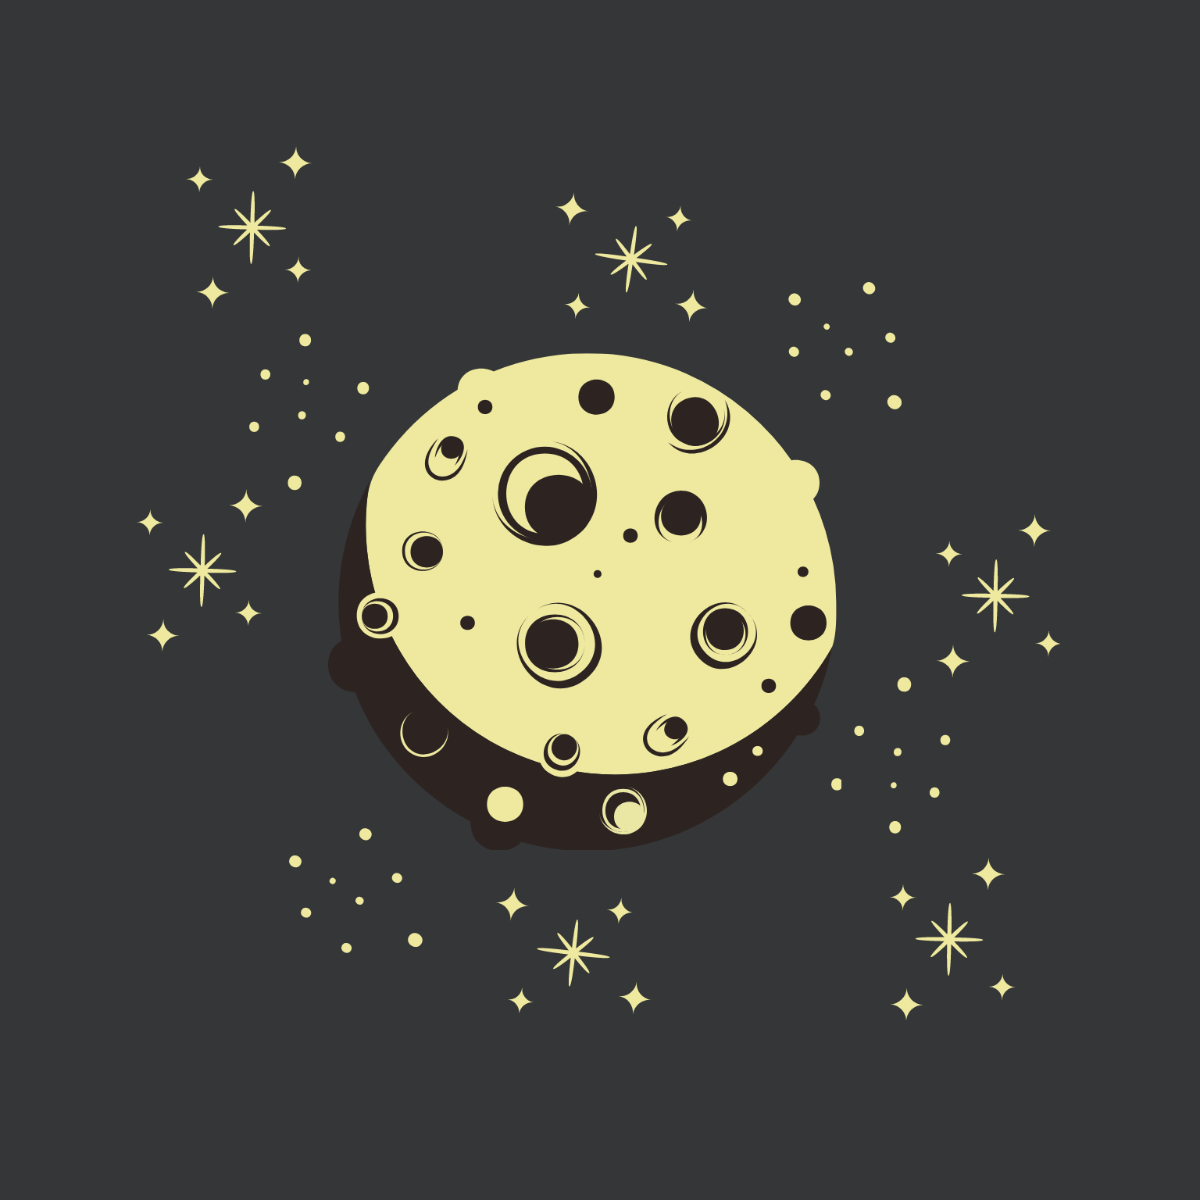 Free Vintage Moon and Stars Vector Template